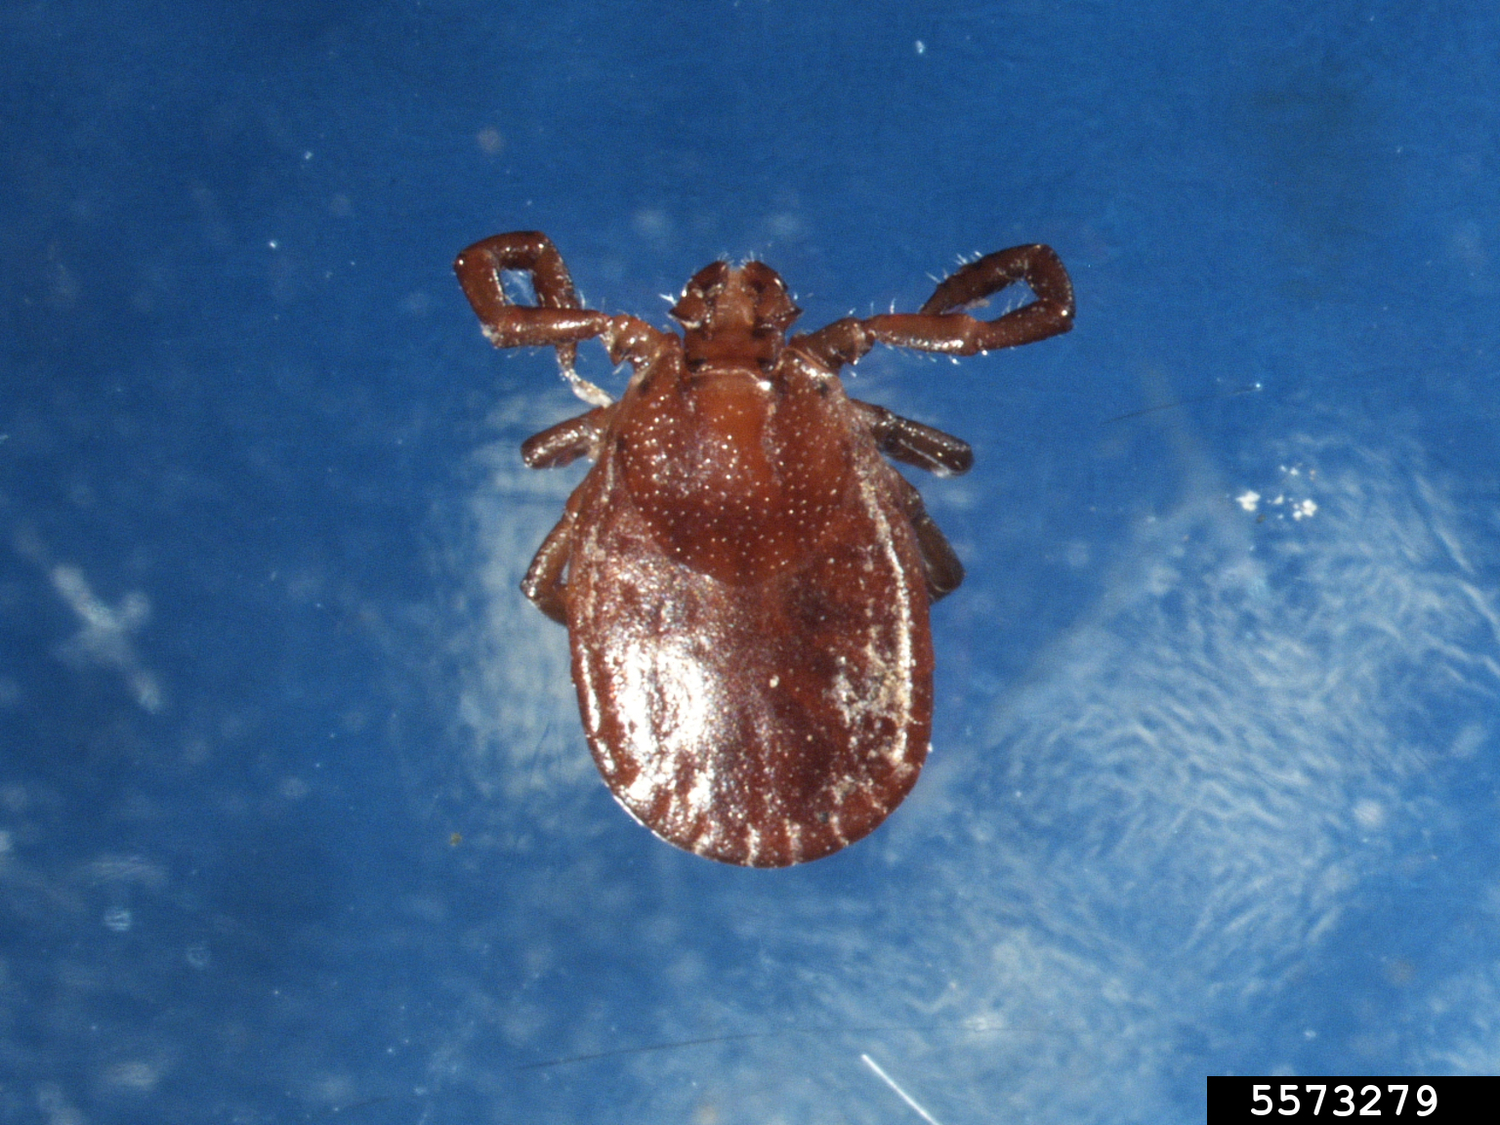 Asian longhorned tick.  ERIC R. DAY, VIRGINIA POLYTECHNIC INSTITUTE AND STATE UNIVERSITY, BUGWOOD.ORG, CC BY 3.0 US